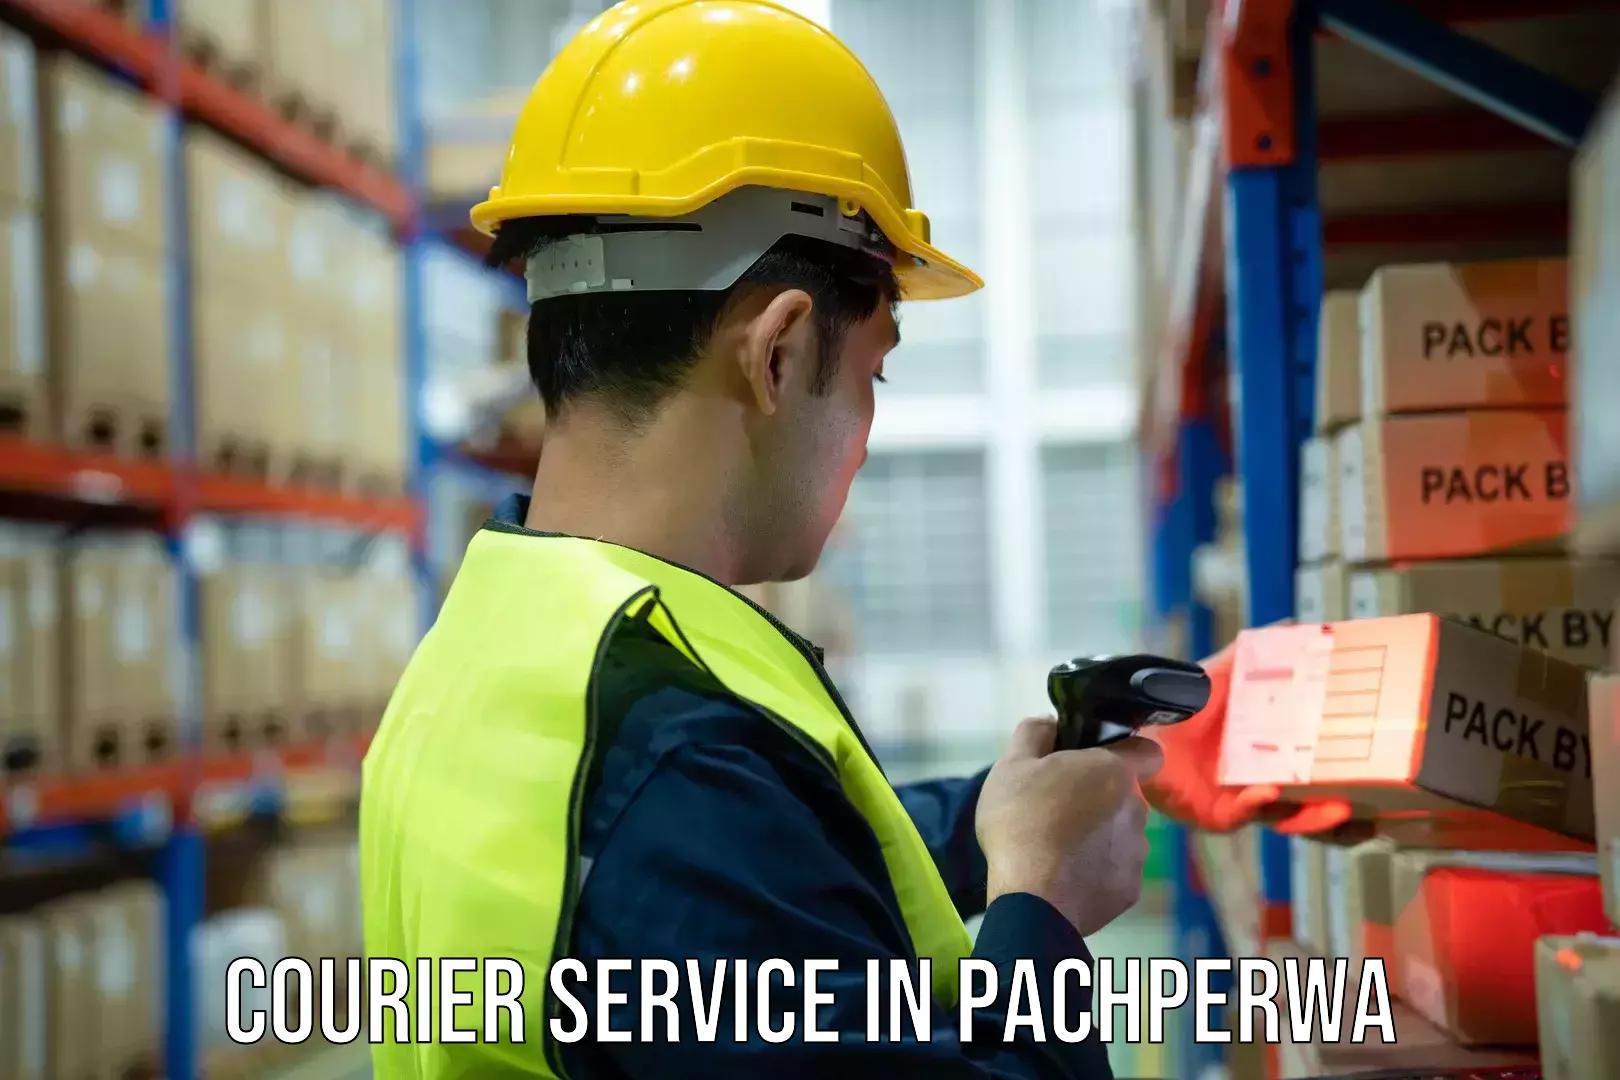 Fast delivery service in Pachperwa